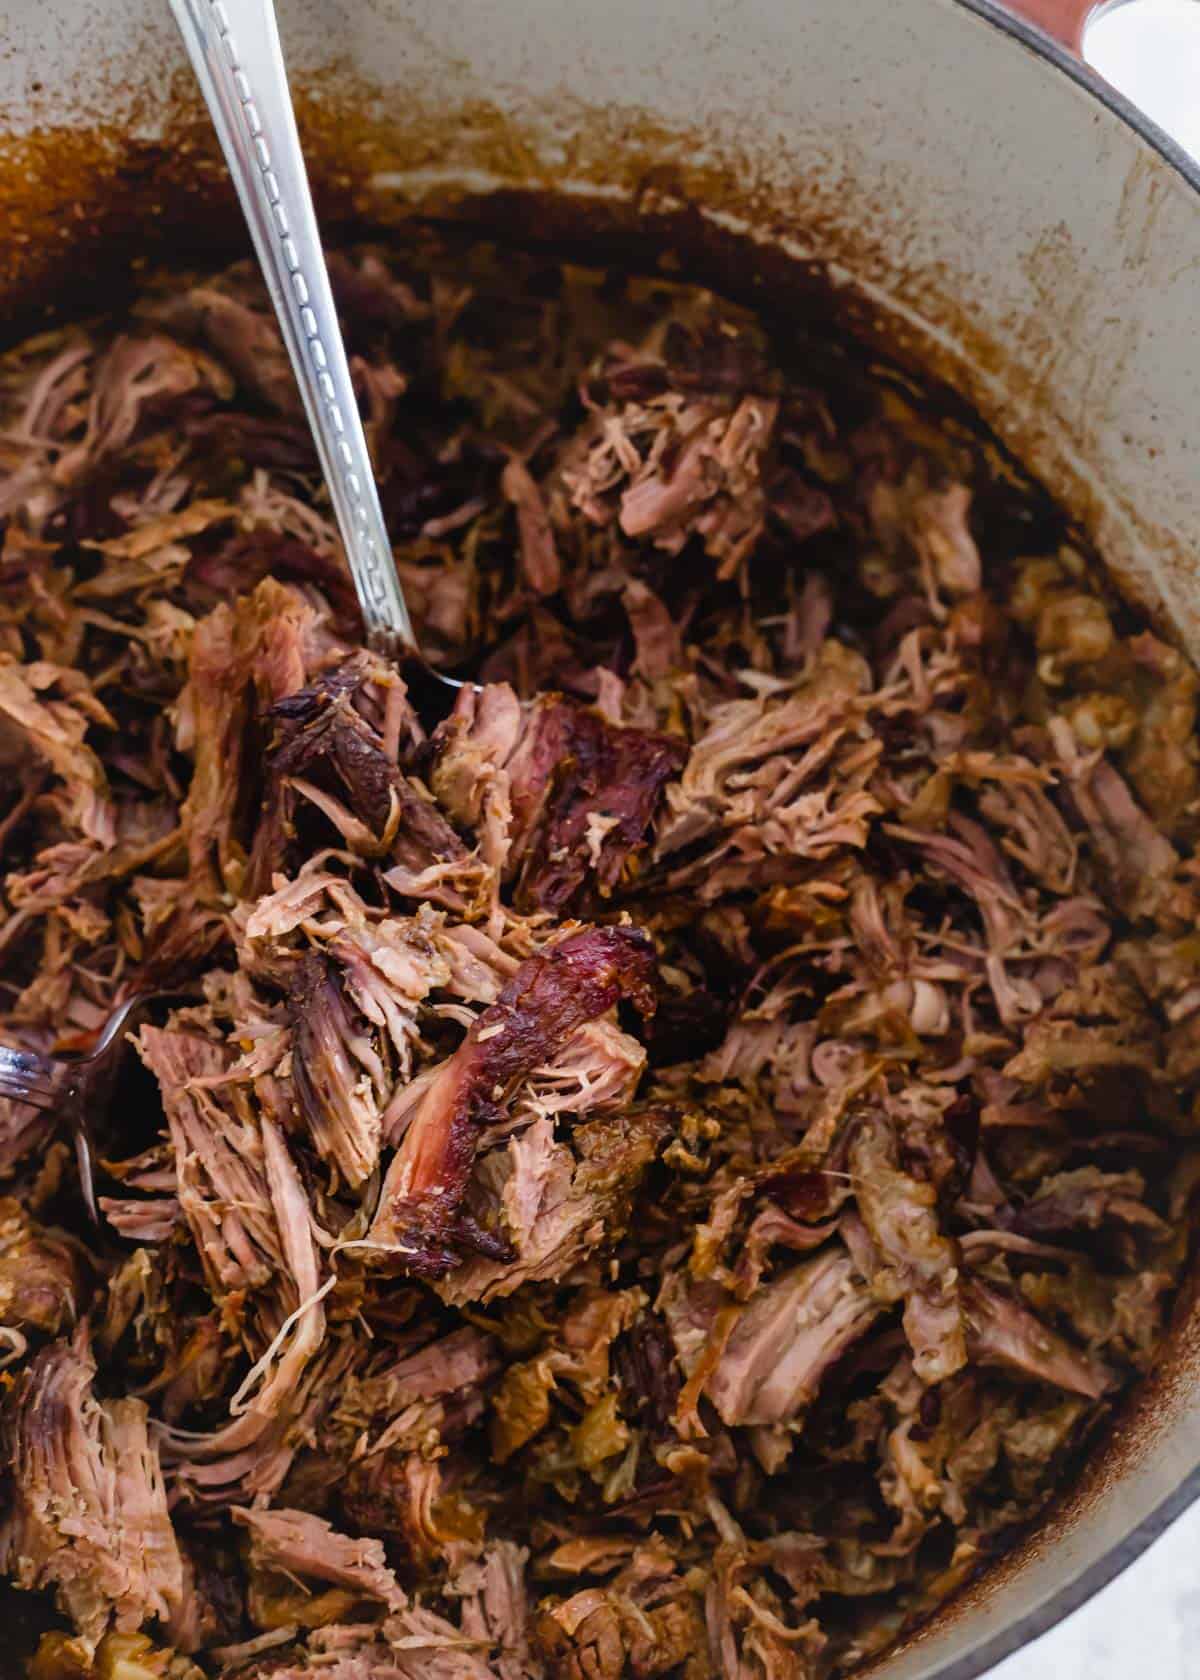 Tender, juicy and shredded braised leg of lamb in a Dutch oven.